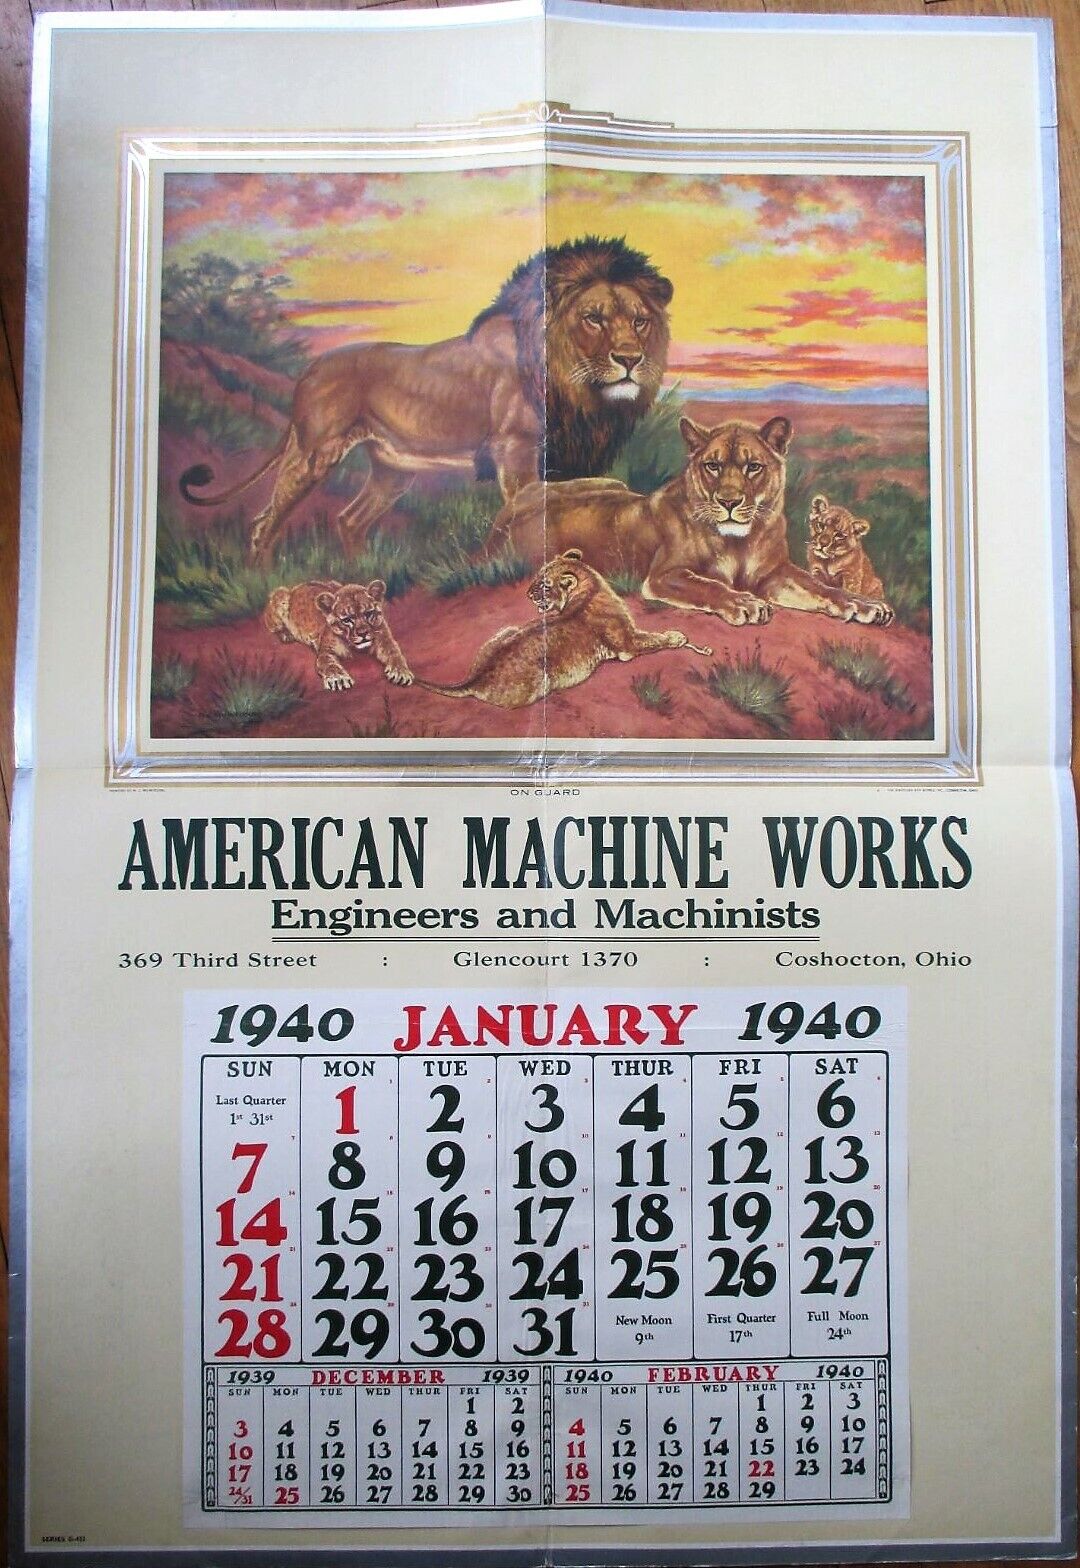 Coshocton, OH 1940 Advertising Calendar/29x43 Poster: Lion Family, Machine Works